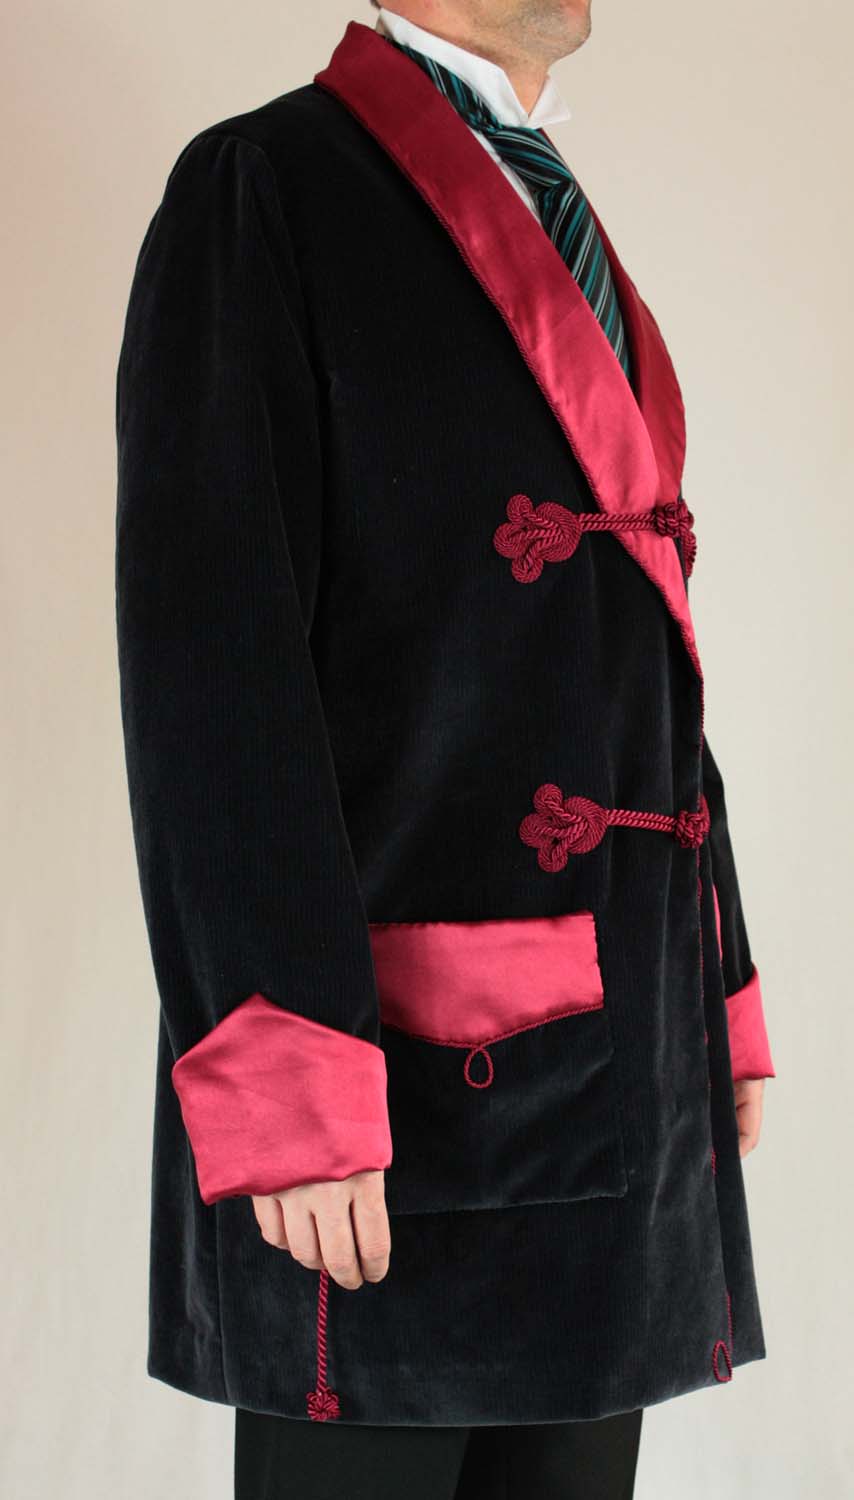 #1215 Mens Smoking Jacket and Fez about 1900 Sewing Pattern Size US 34-56 (EU 44-66) Pdf Download